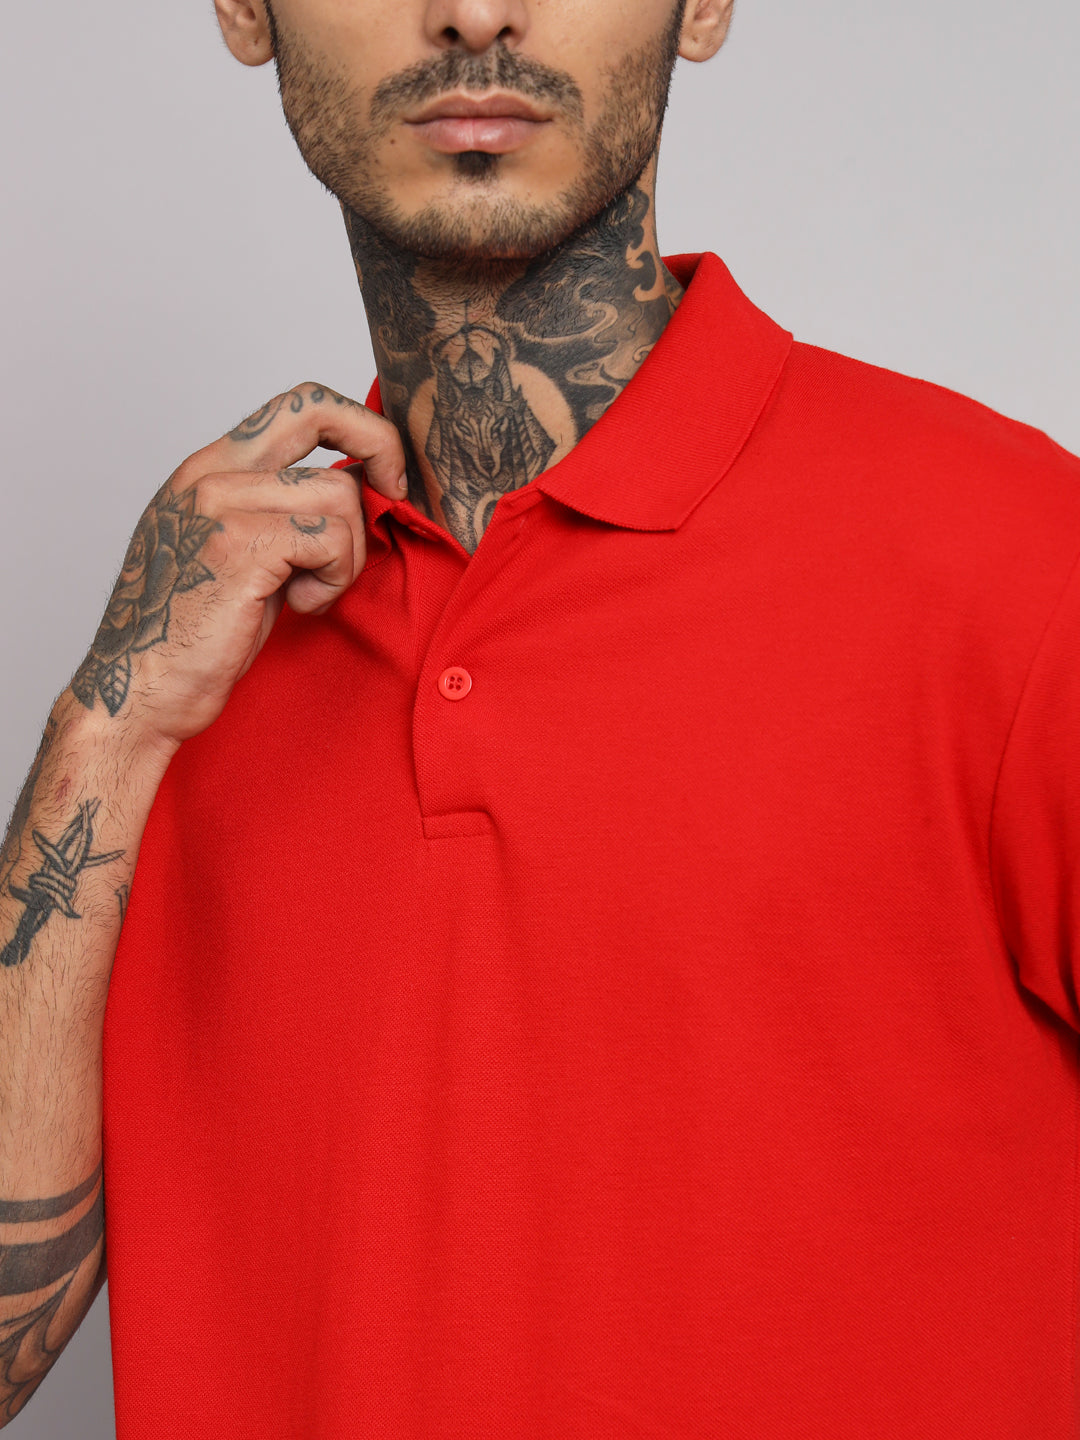 GRIFFEL Men's Red Basic Solid Cotton Polo T-shirt - griffel